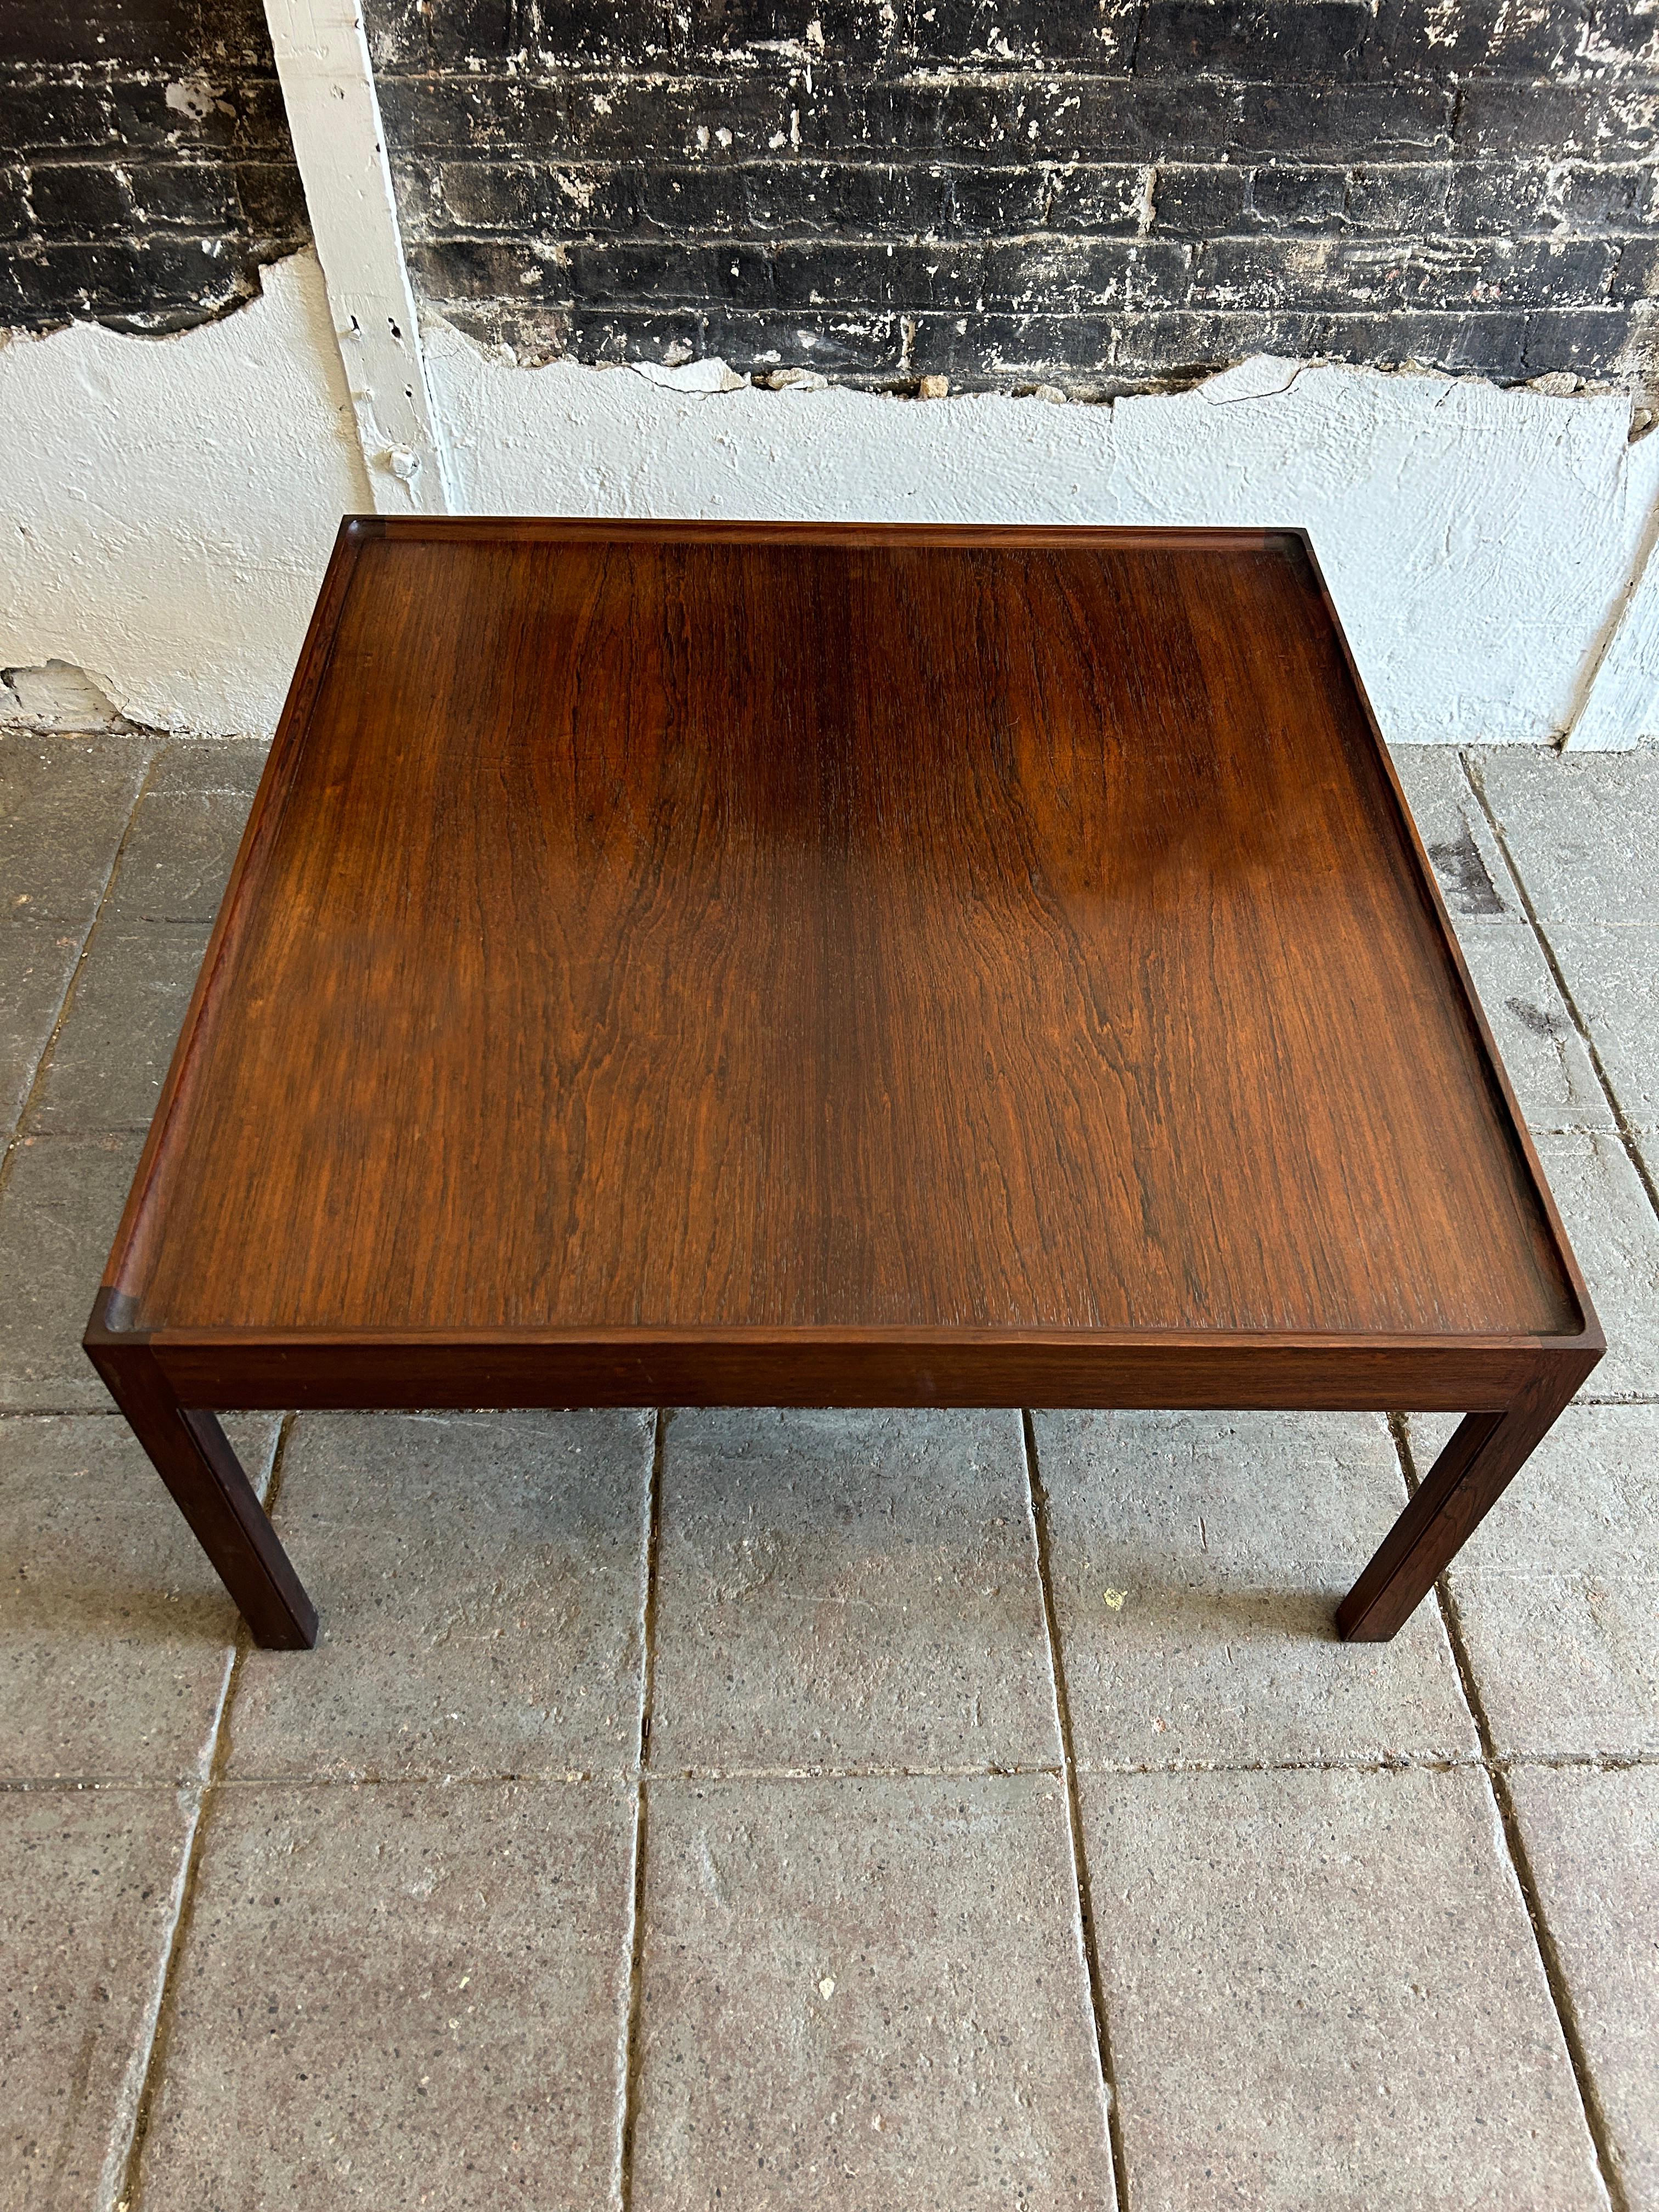 Mid century Danish modern Rosewood square coffee table with recessed lip. Designed by Erik Christian Sorensen for Bo-Ex. Very beautiful high quality woodworking. Beautiful Rosewood grain all around. Made in Denmark located in Brooklyn NYC.

Measures